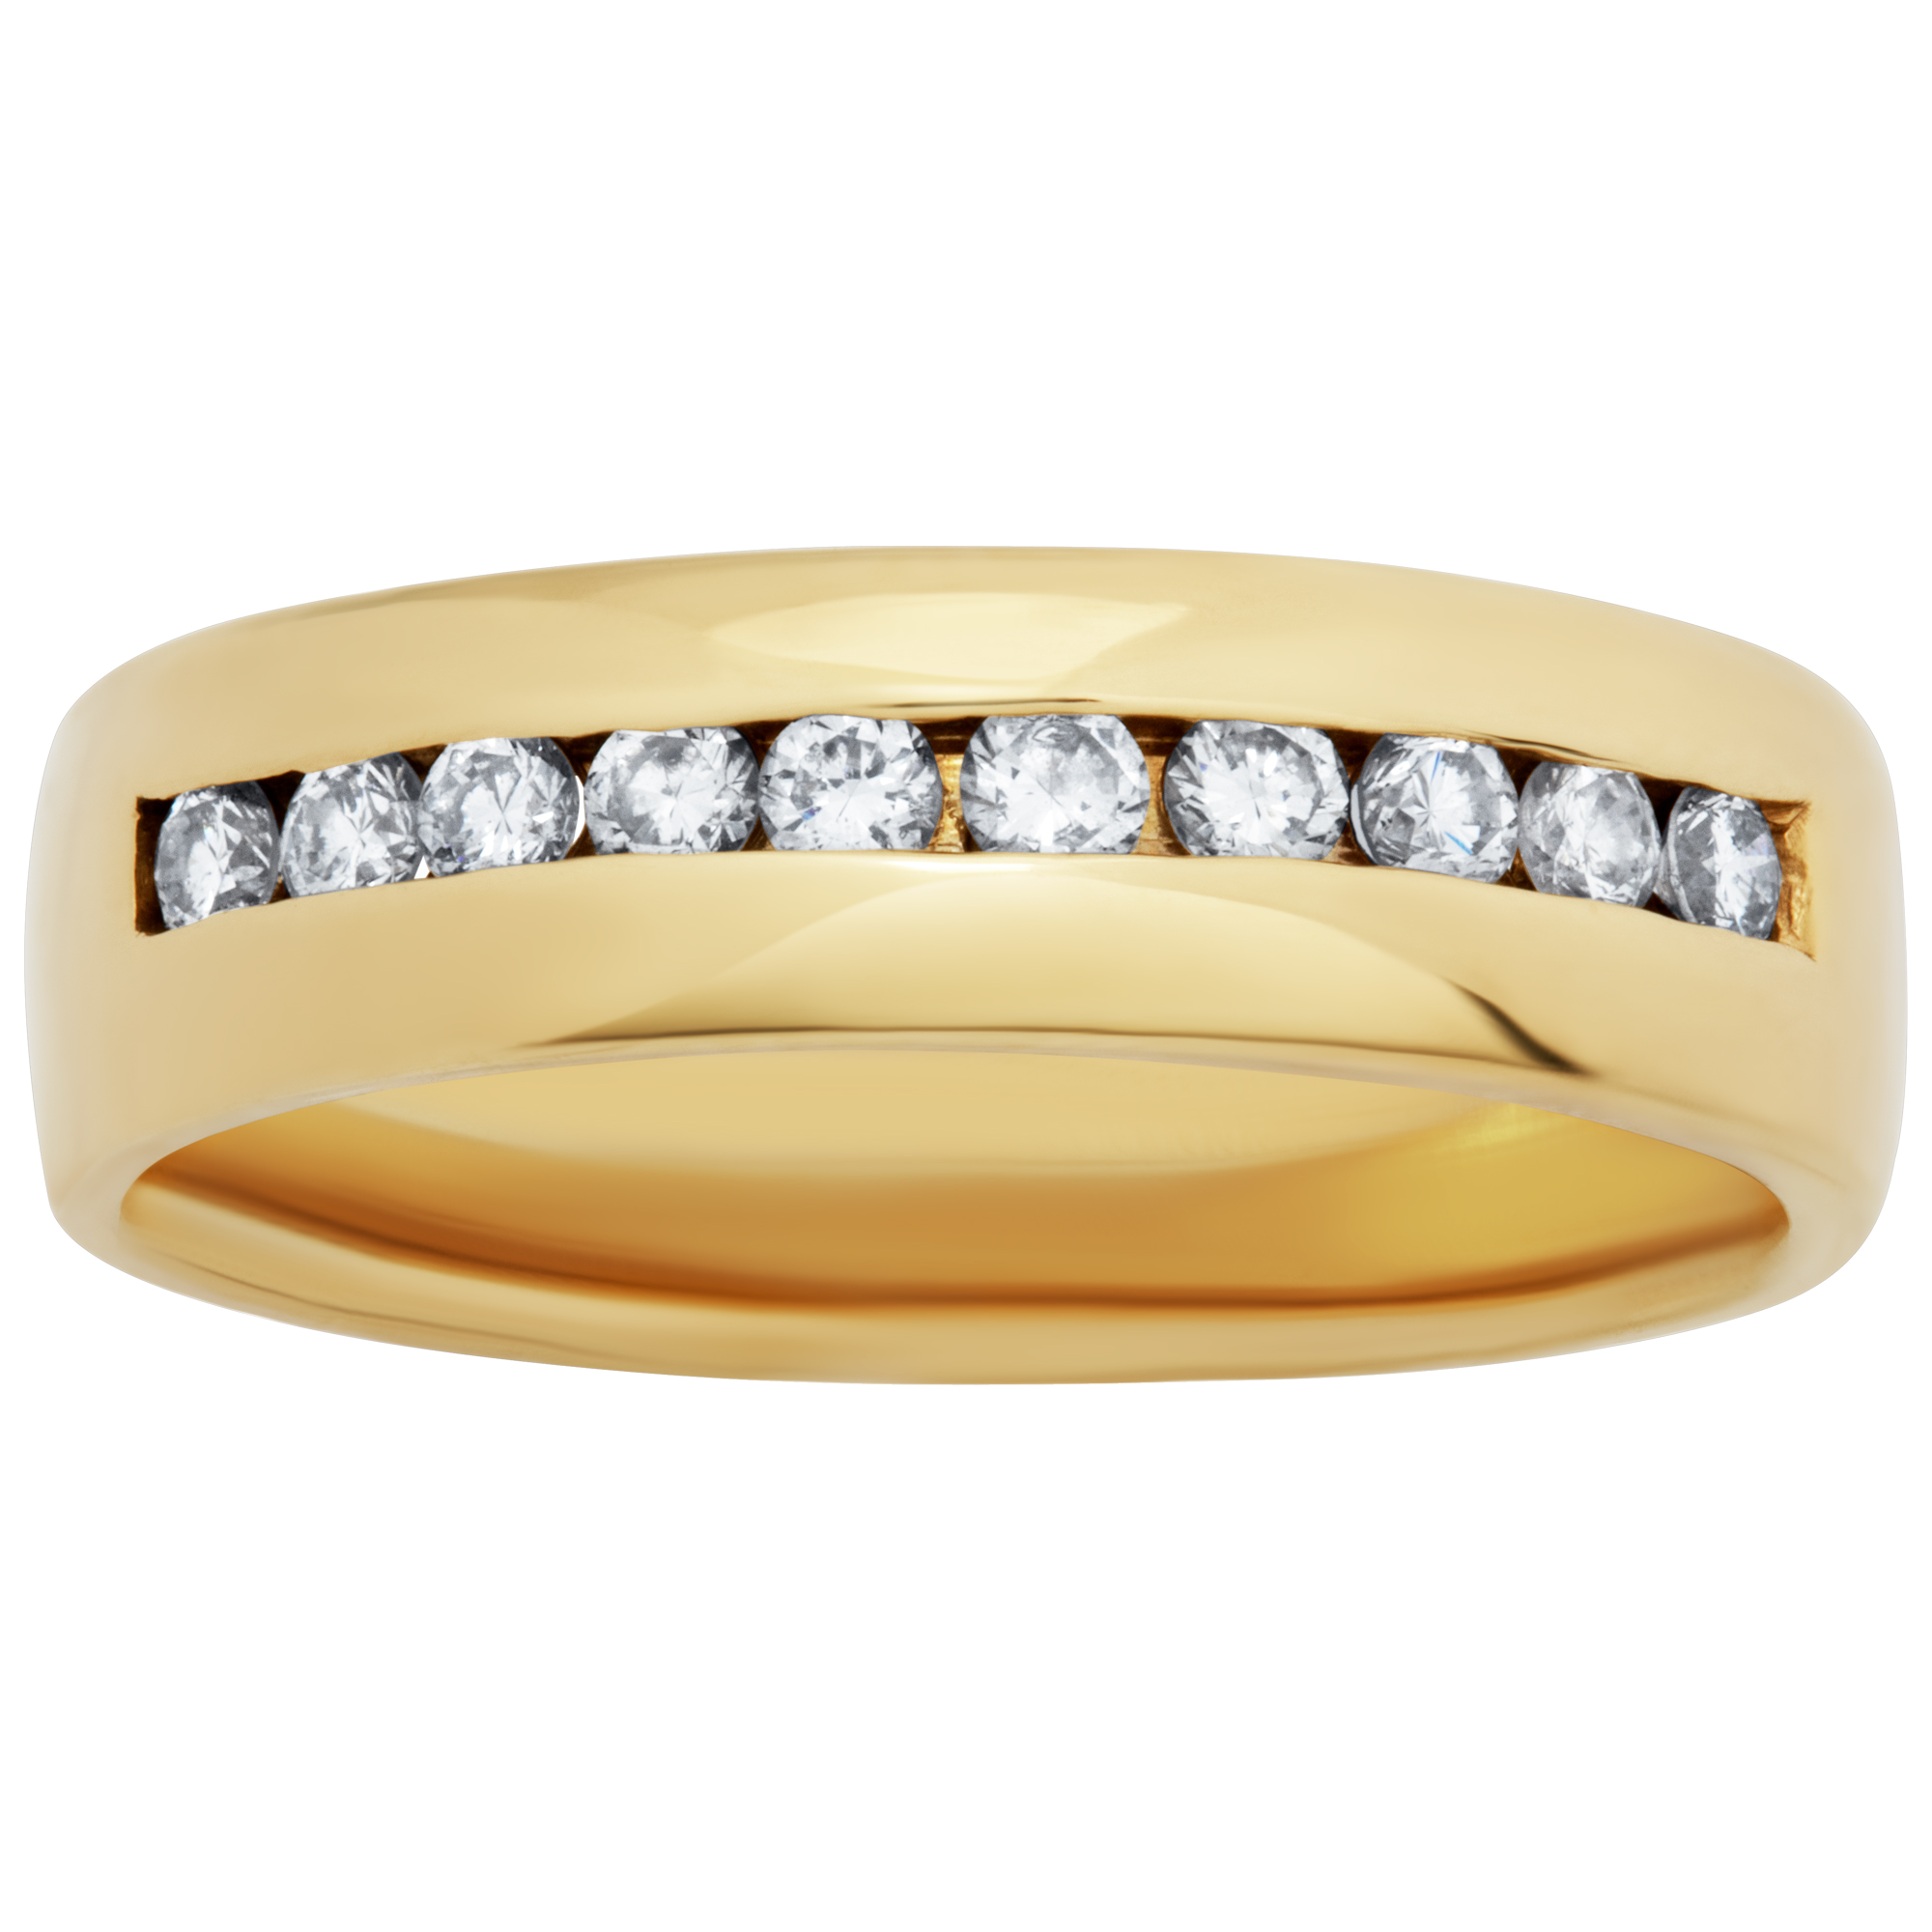 Semi Diamond Eternity Band and Ring in 14k yellow gold. 0.50 carats in channel set diamonds. Size 10.5 image 1